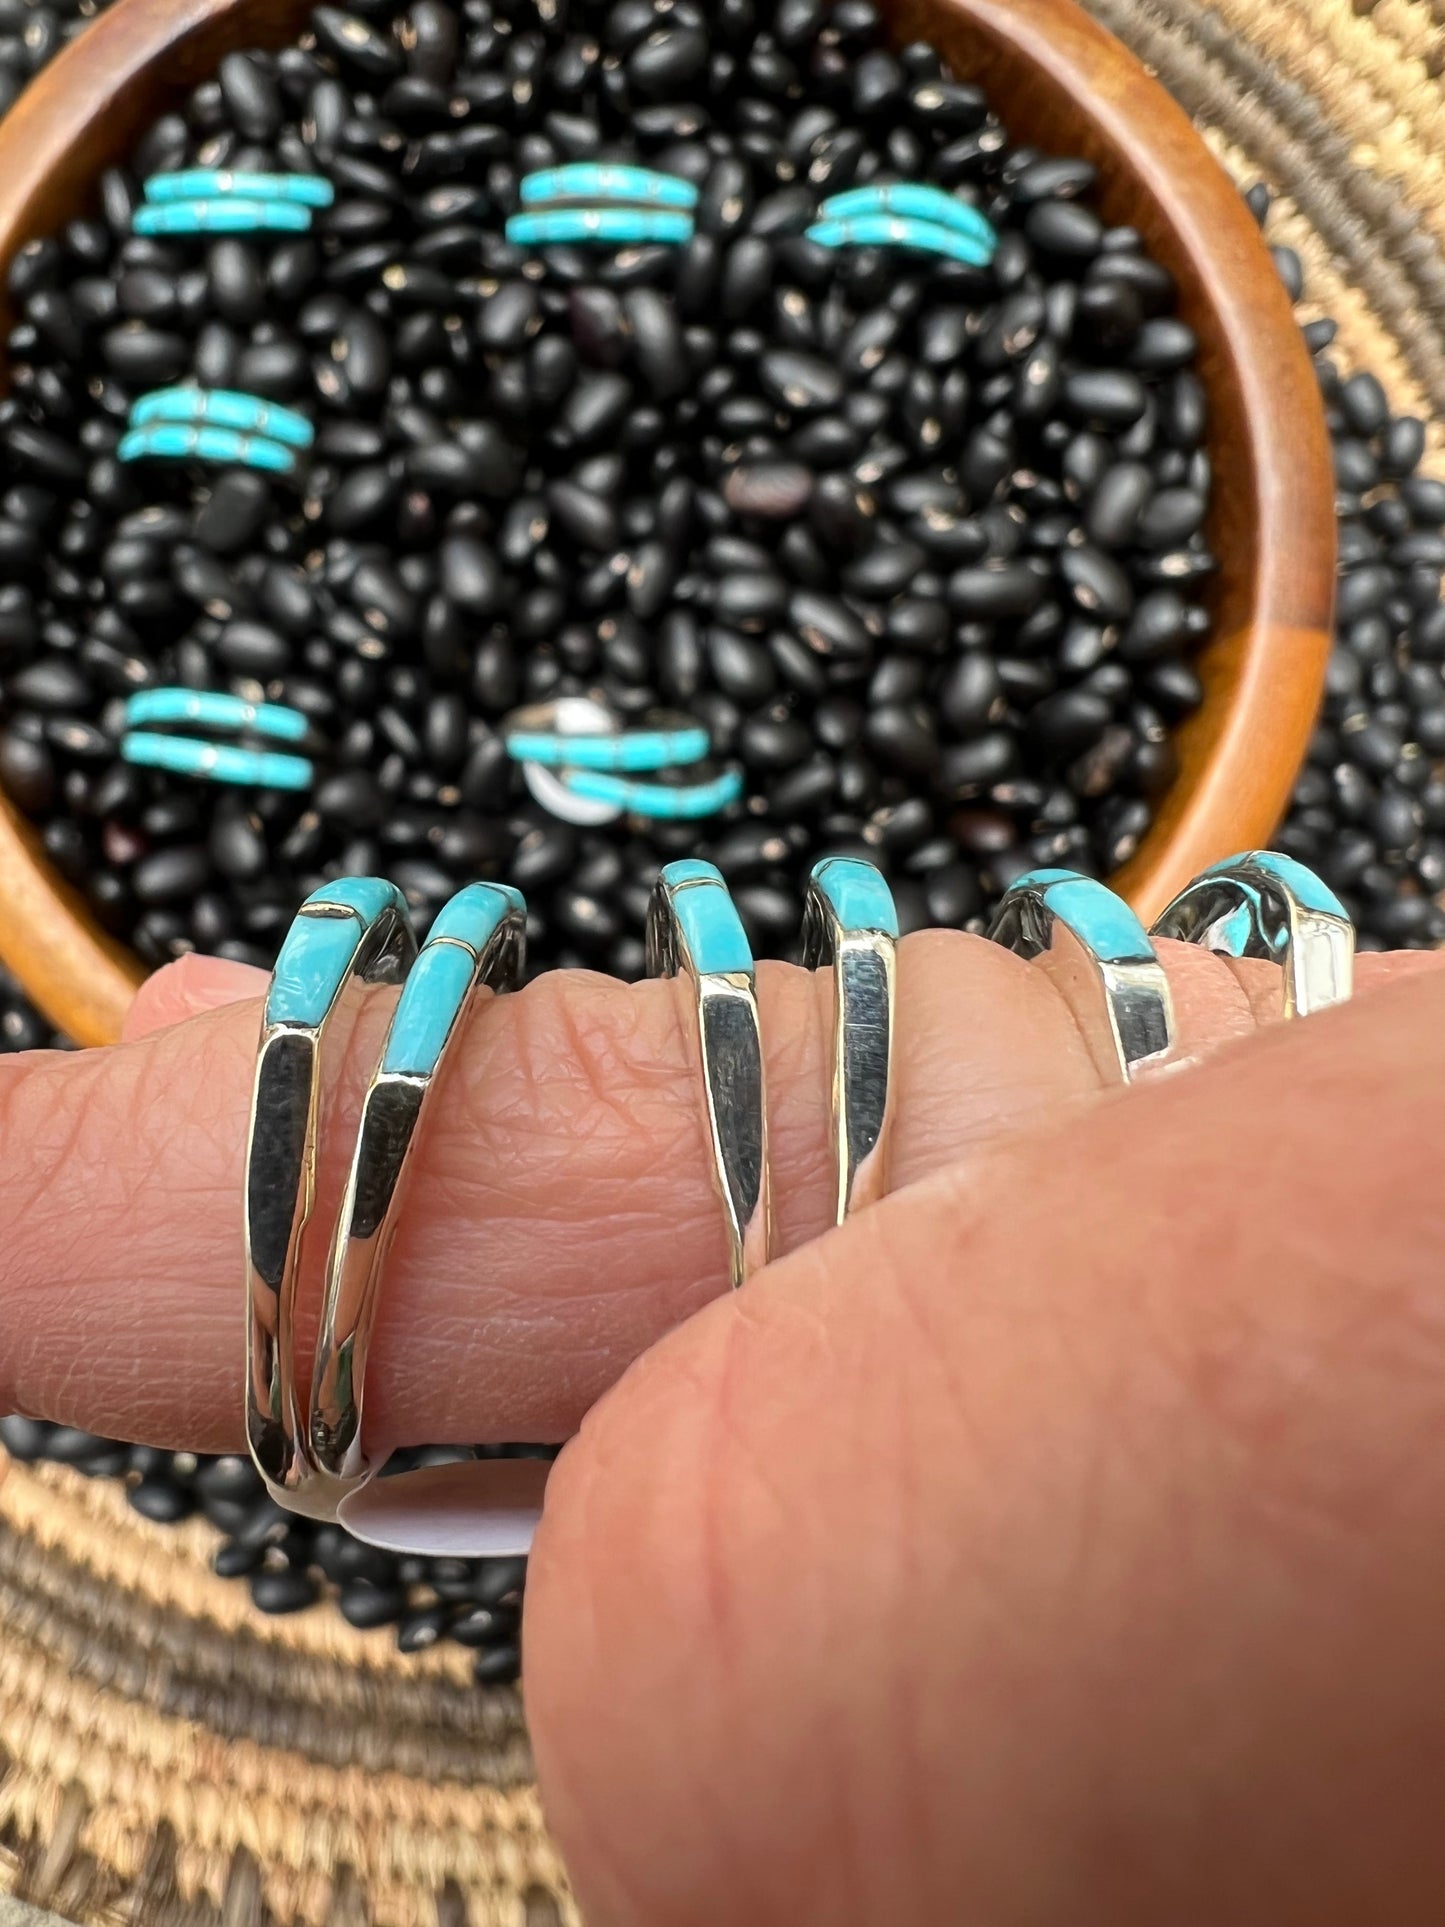 Inlaid turquoise wedding stacker rings